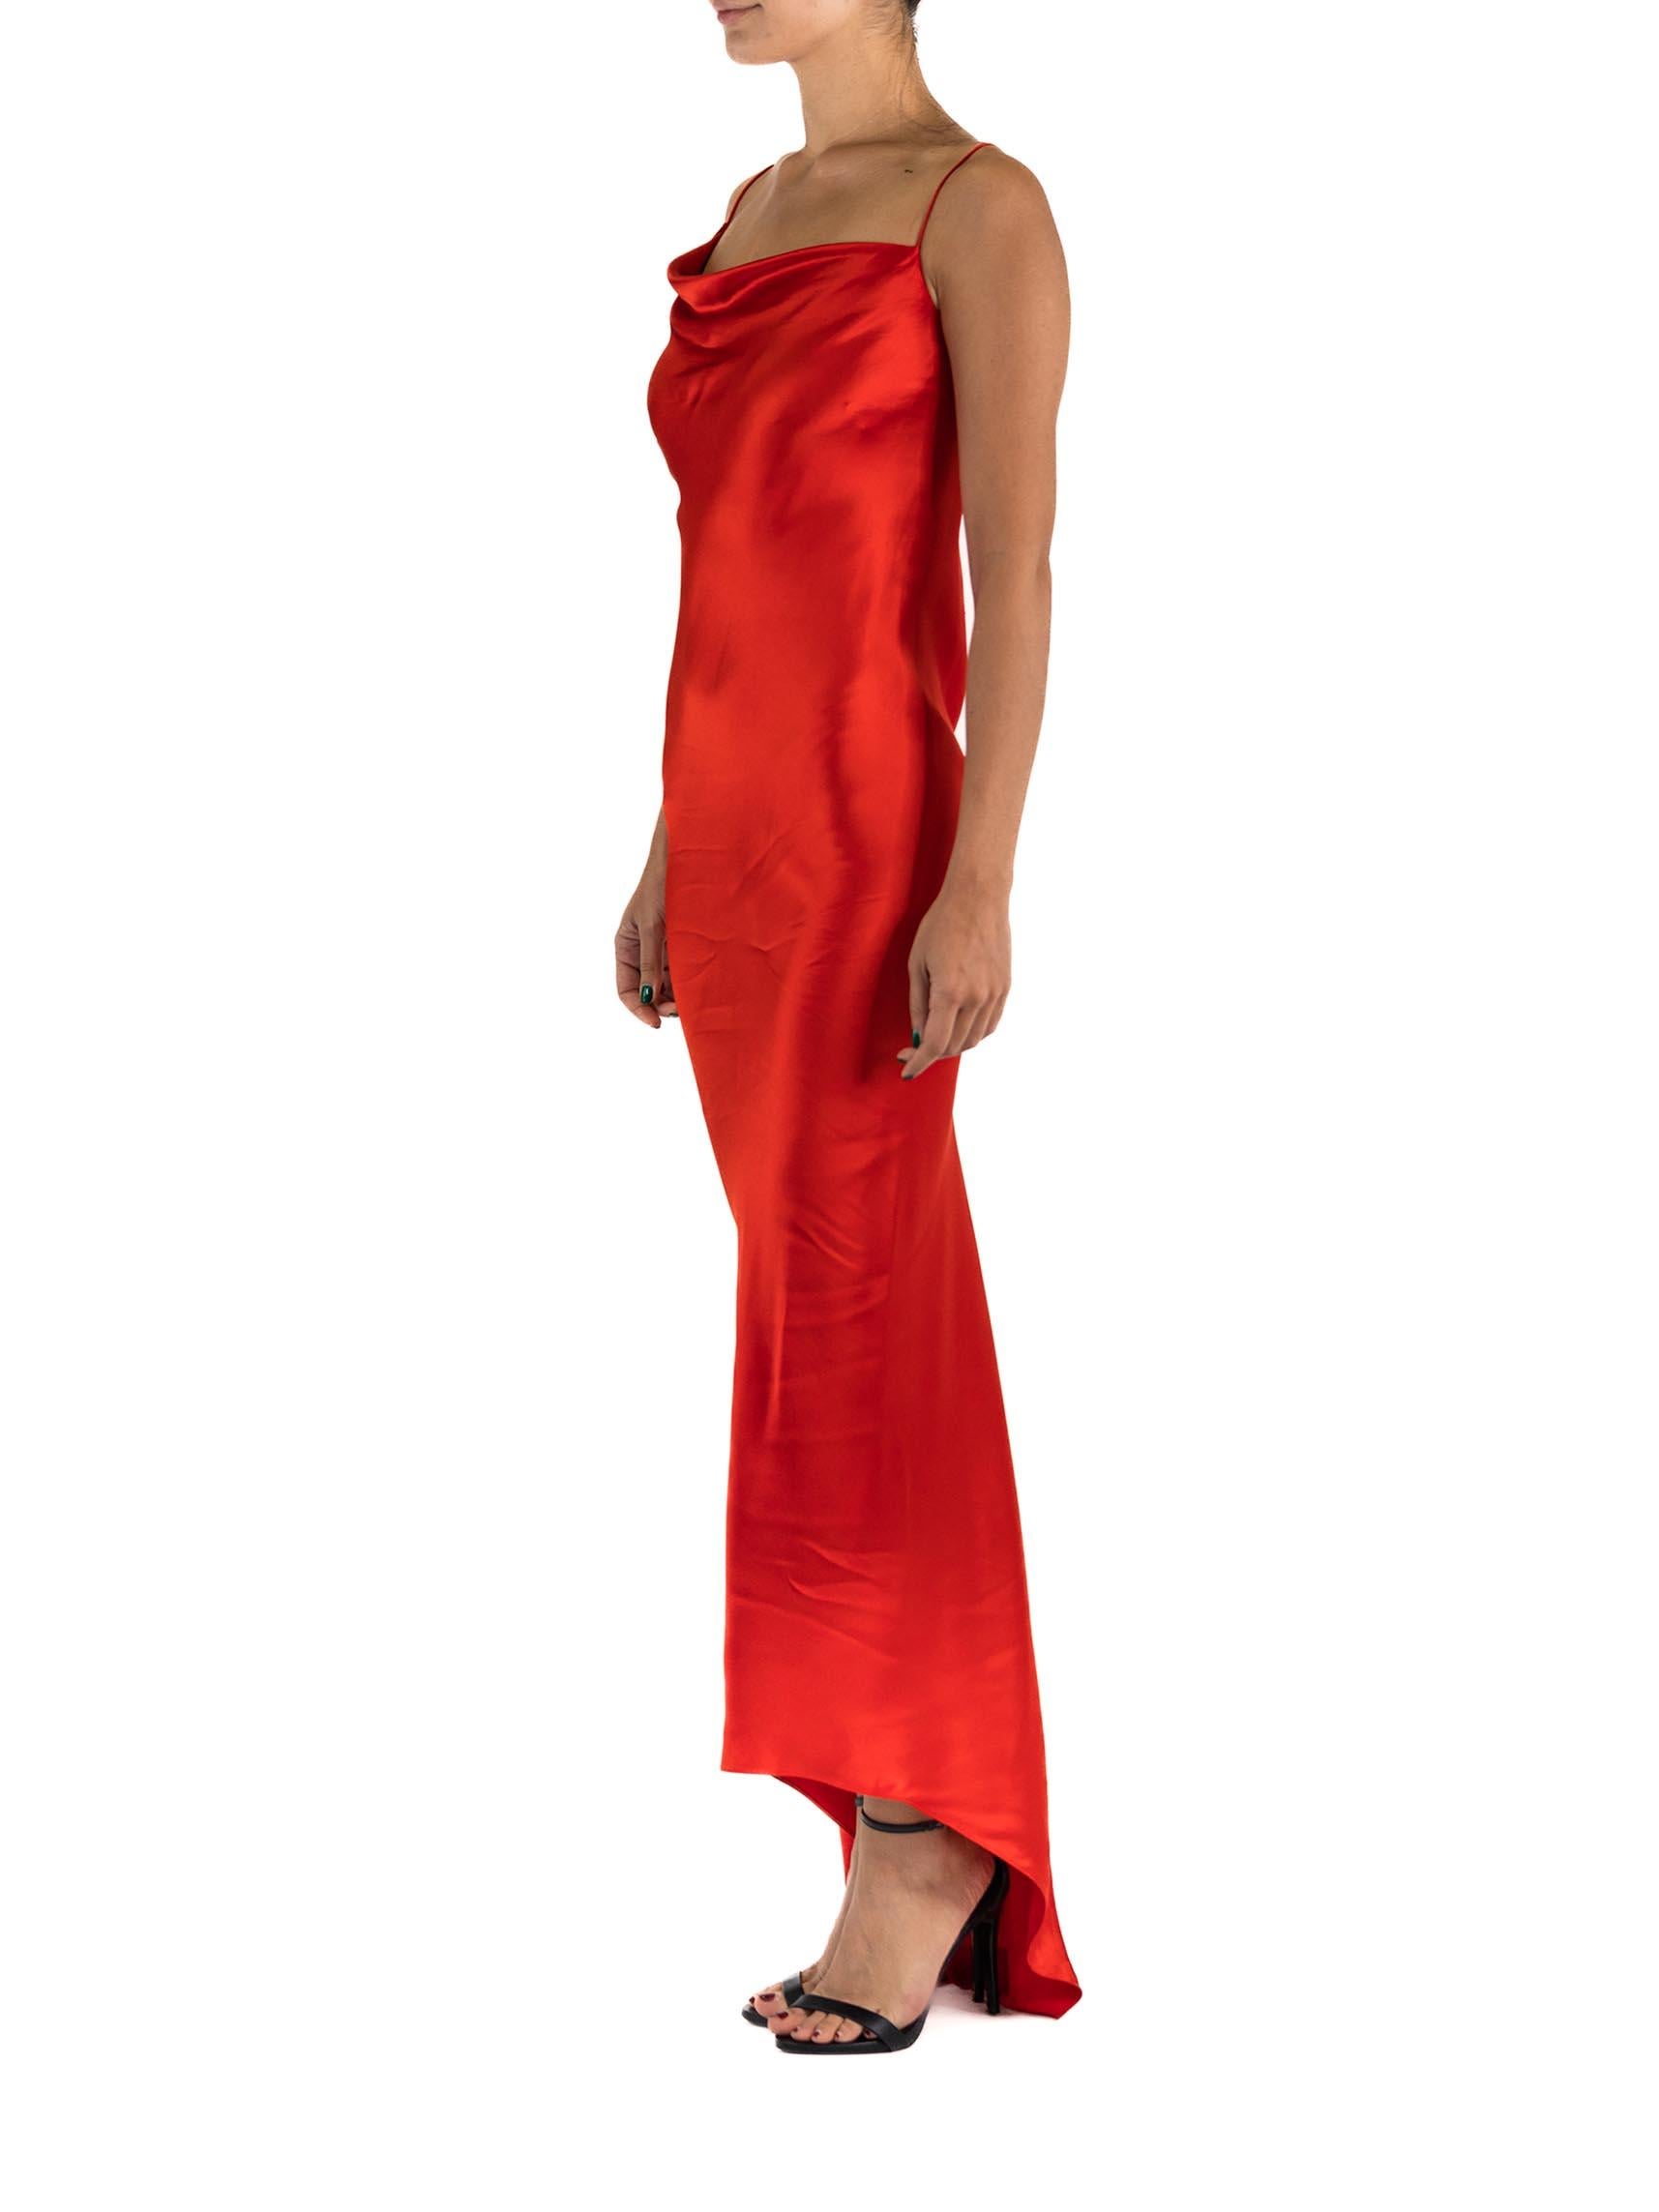 1990S DONNA KARAN Cherry Red Bias Cut Rayon Blend Satin Minimal Gown In Excellent Condition For Sale In New York, NY